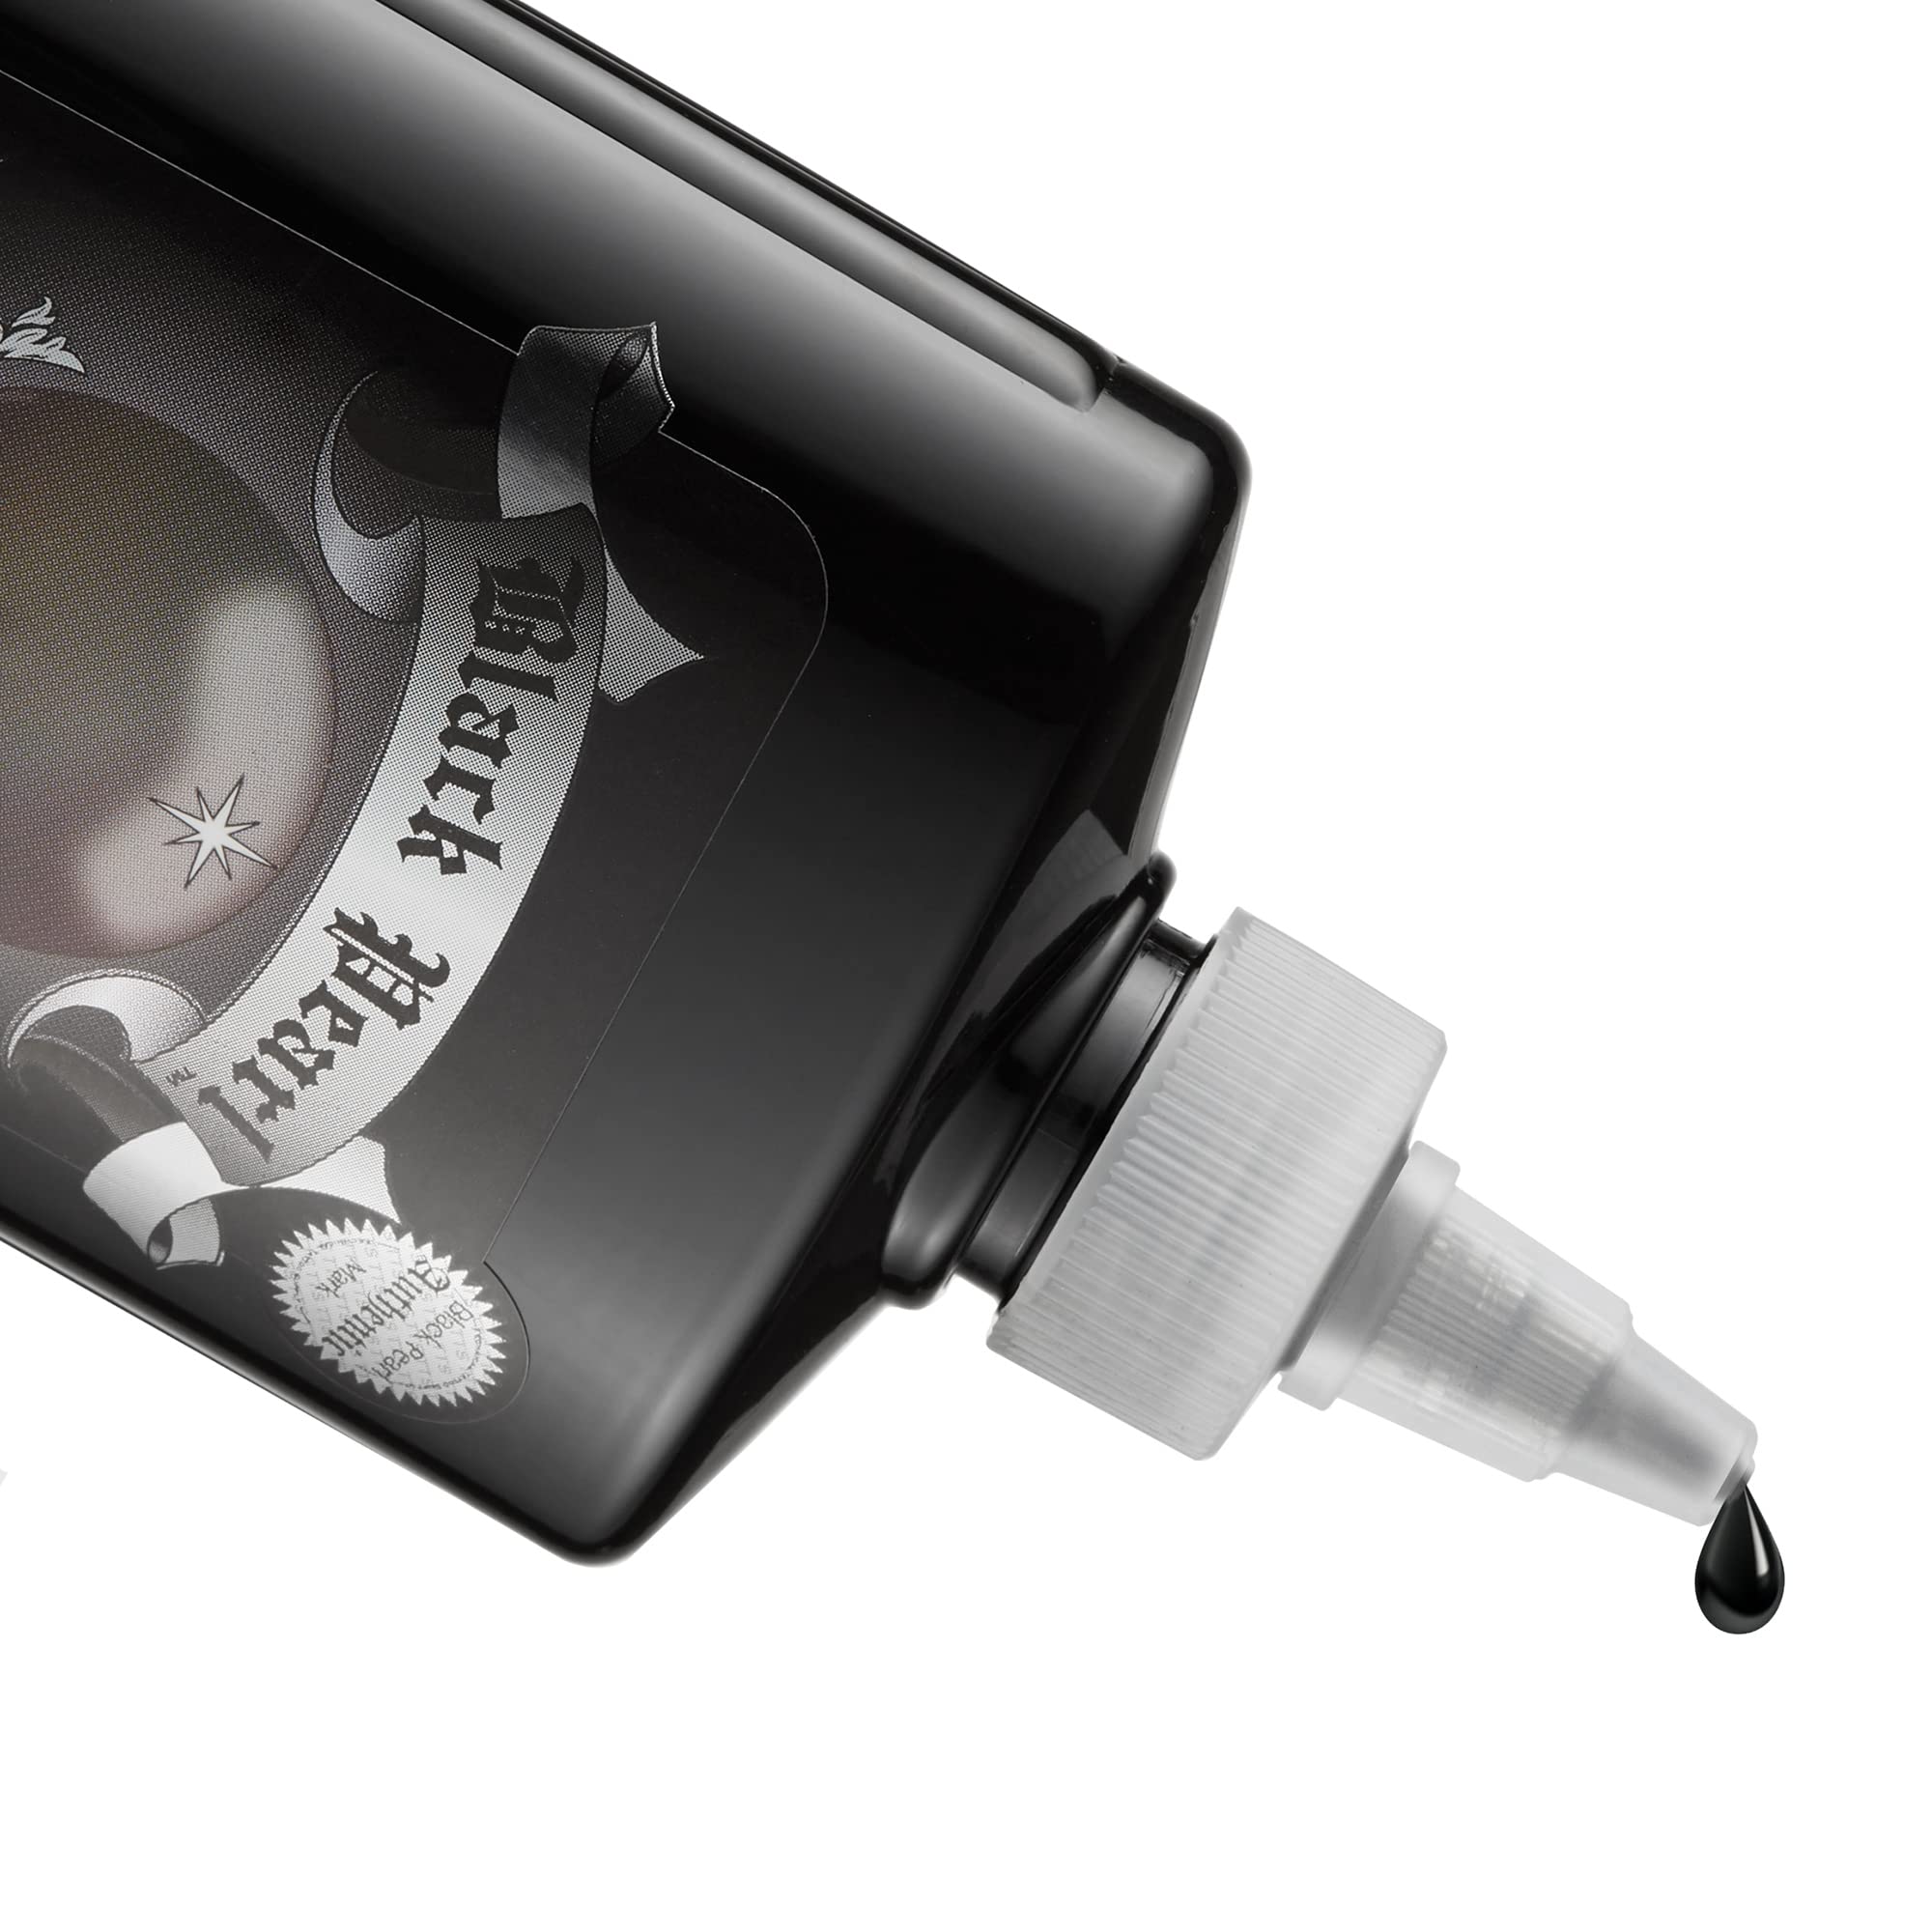 Mom's Black Pearl Outlining Tattoo Ink 12 Oz. - Plus Ten 5 Round 1 Inch Grip Disposable Tubes